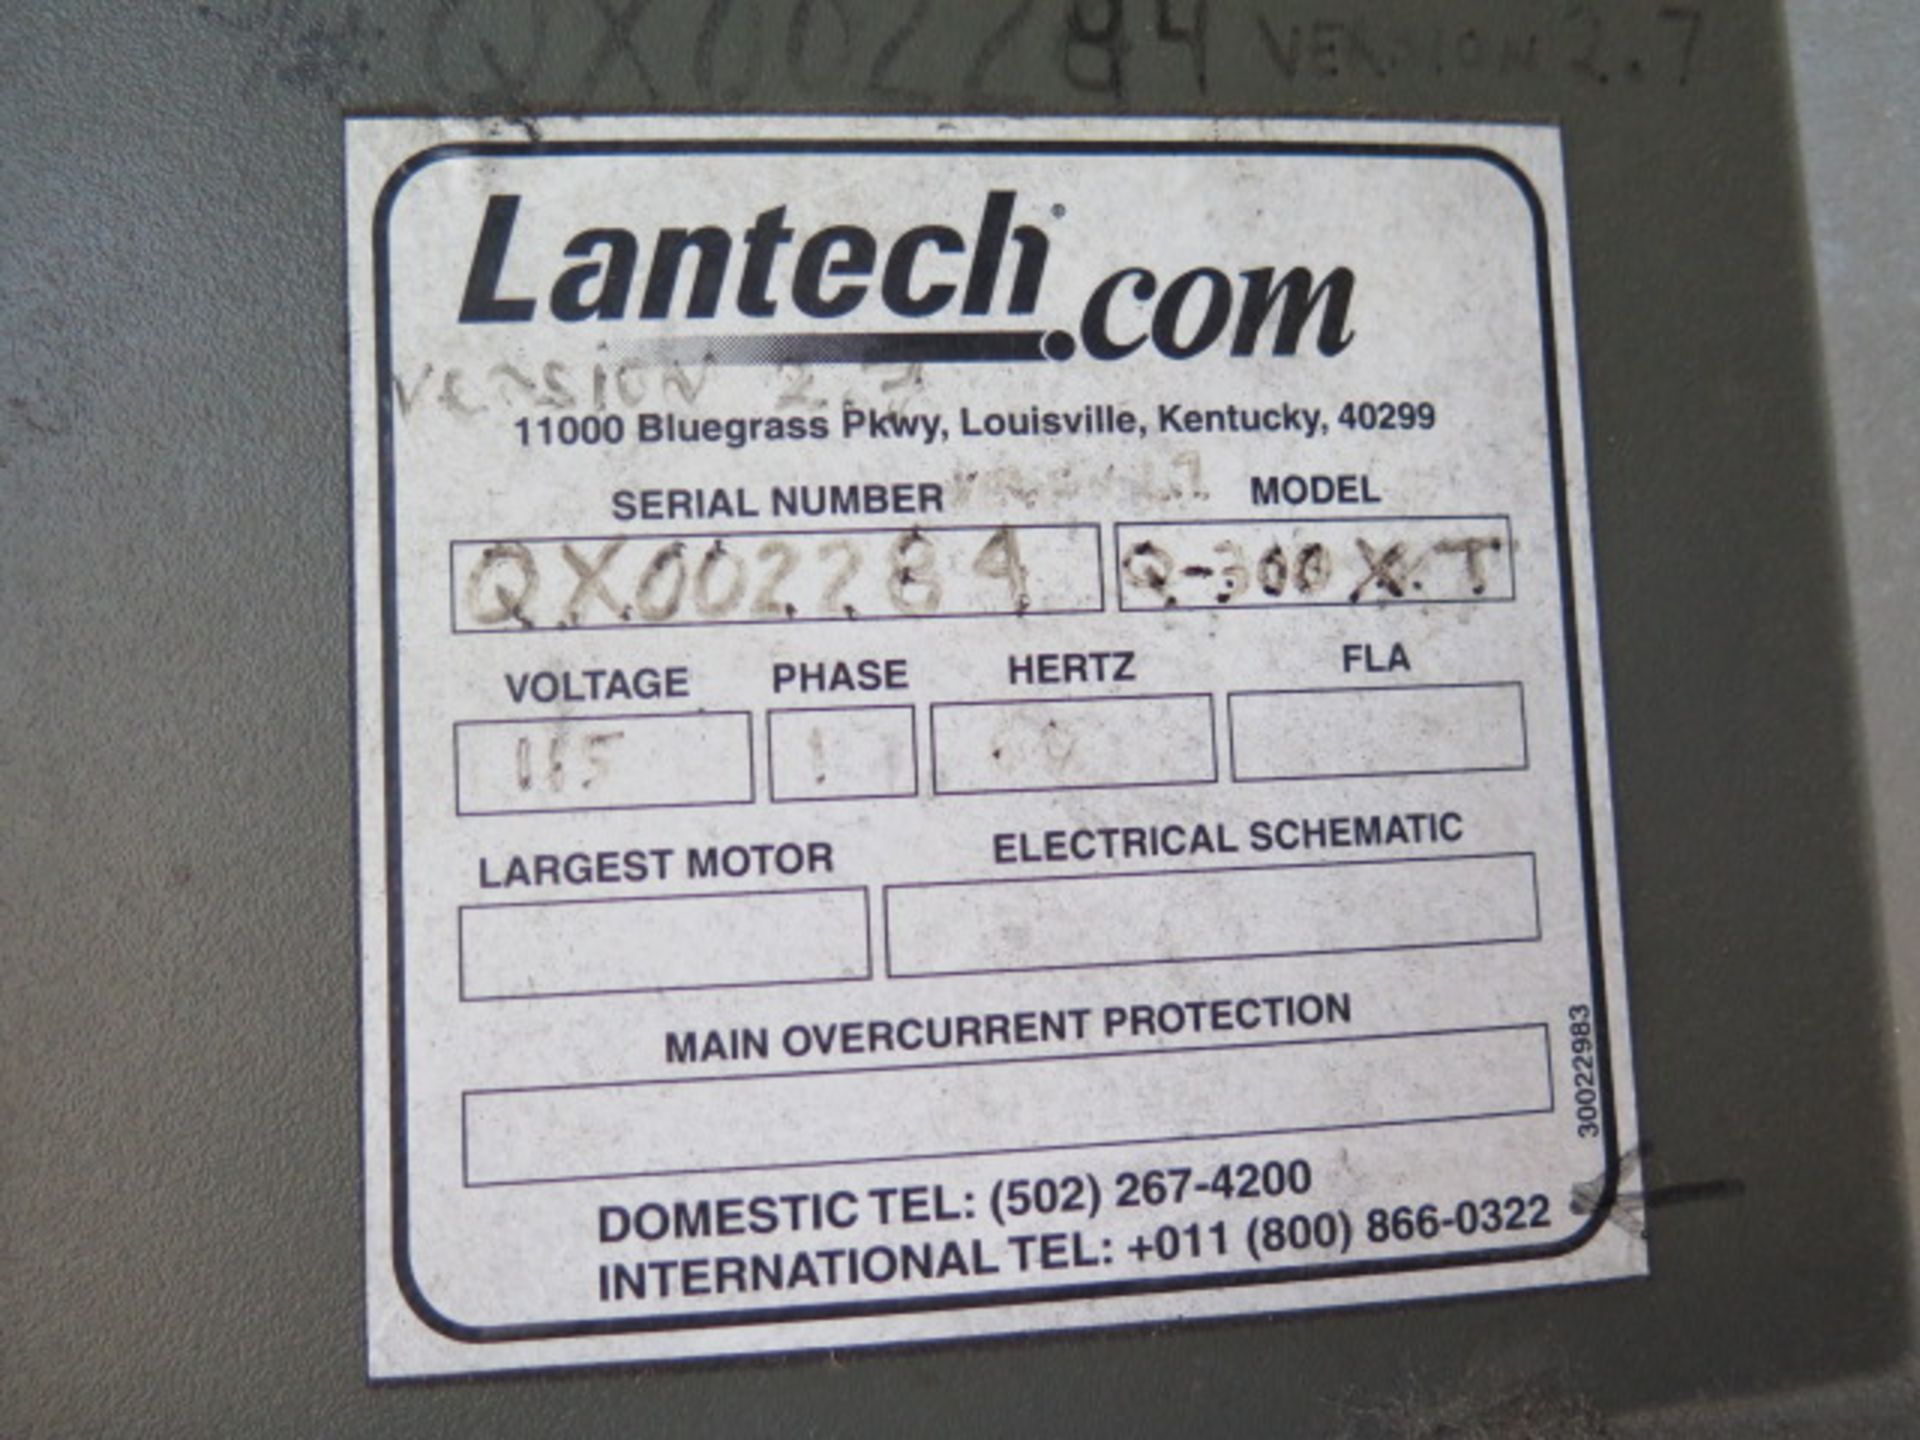 Lantech Q-300 XT Automatic Pallet Wrapper s/n QX002284 (SOLD AS-IS - NO WARRANTY) - Image 9 of 9